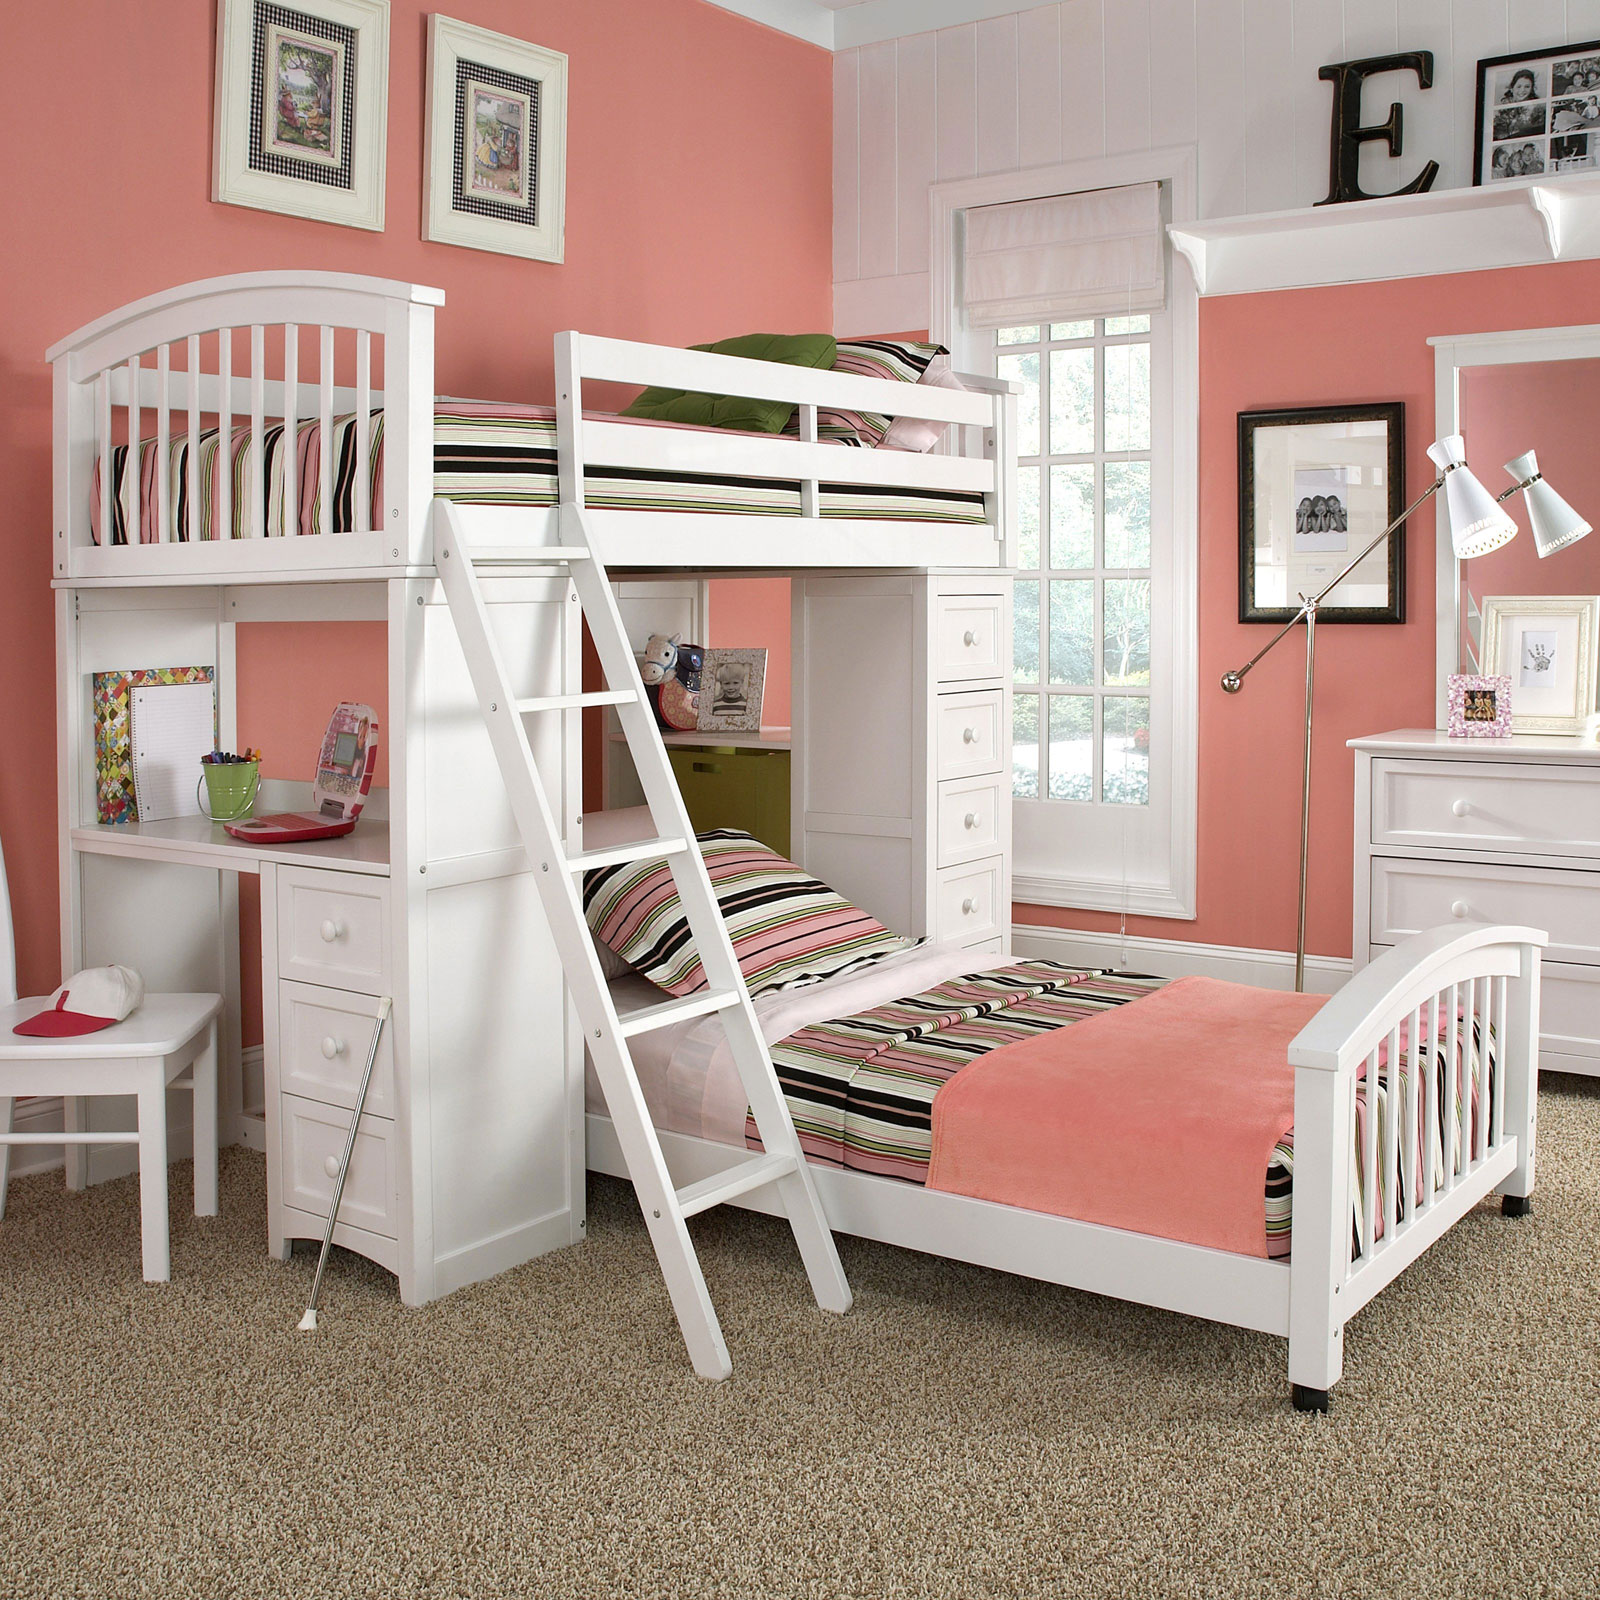 Bunk Bed Drawers Excellent Bunk Bed Combined With Drawers And Desk Applying White Color Of Girls Bedroom Furniture Completed With Flooring Stand Lighting And Vanity Table Bedroom Girls Bedroom Furniture: The Beach Condo Ideas